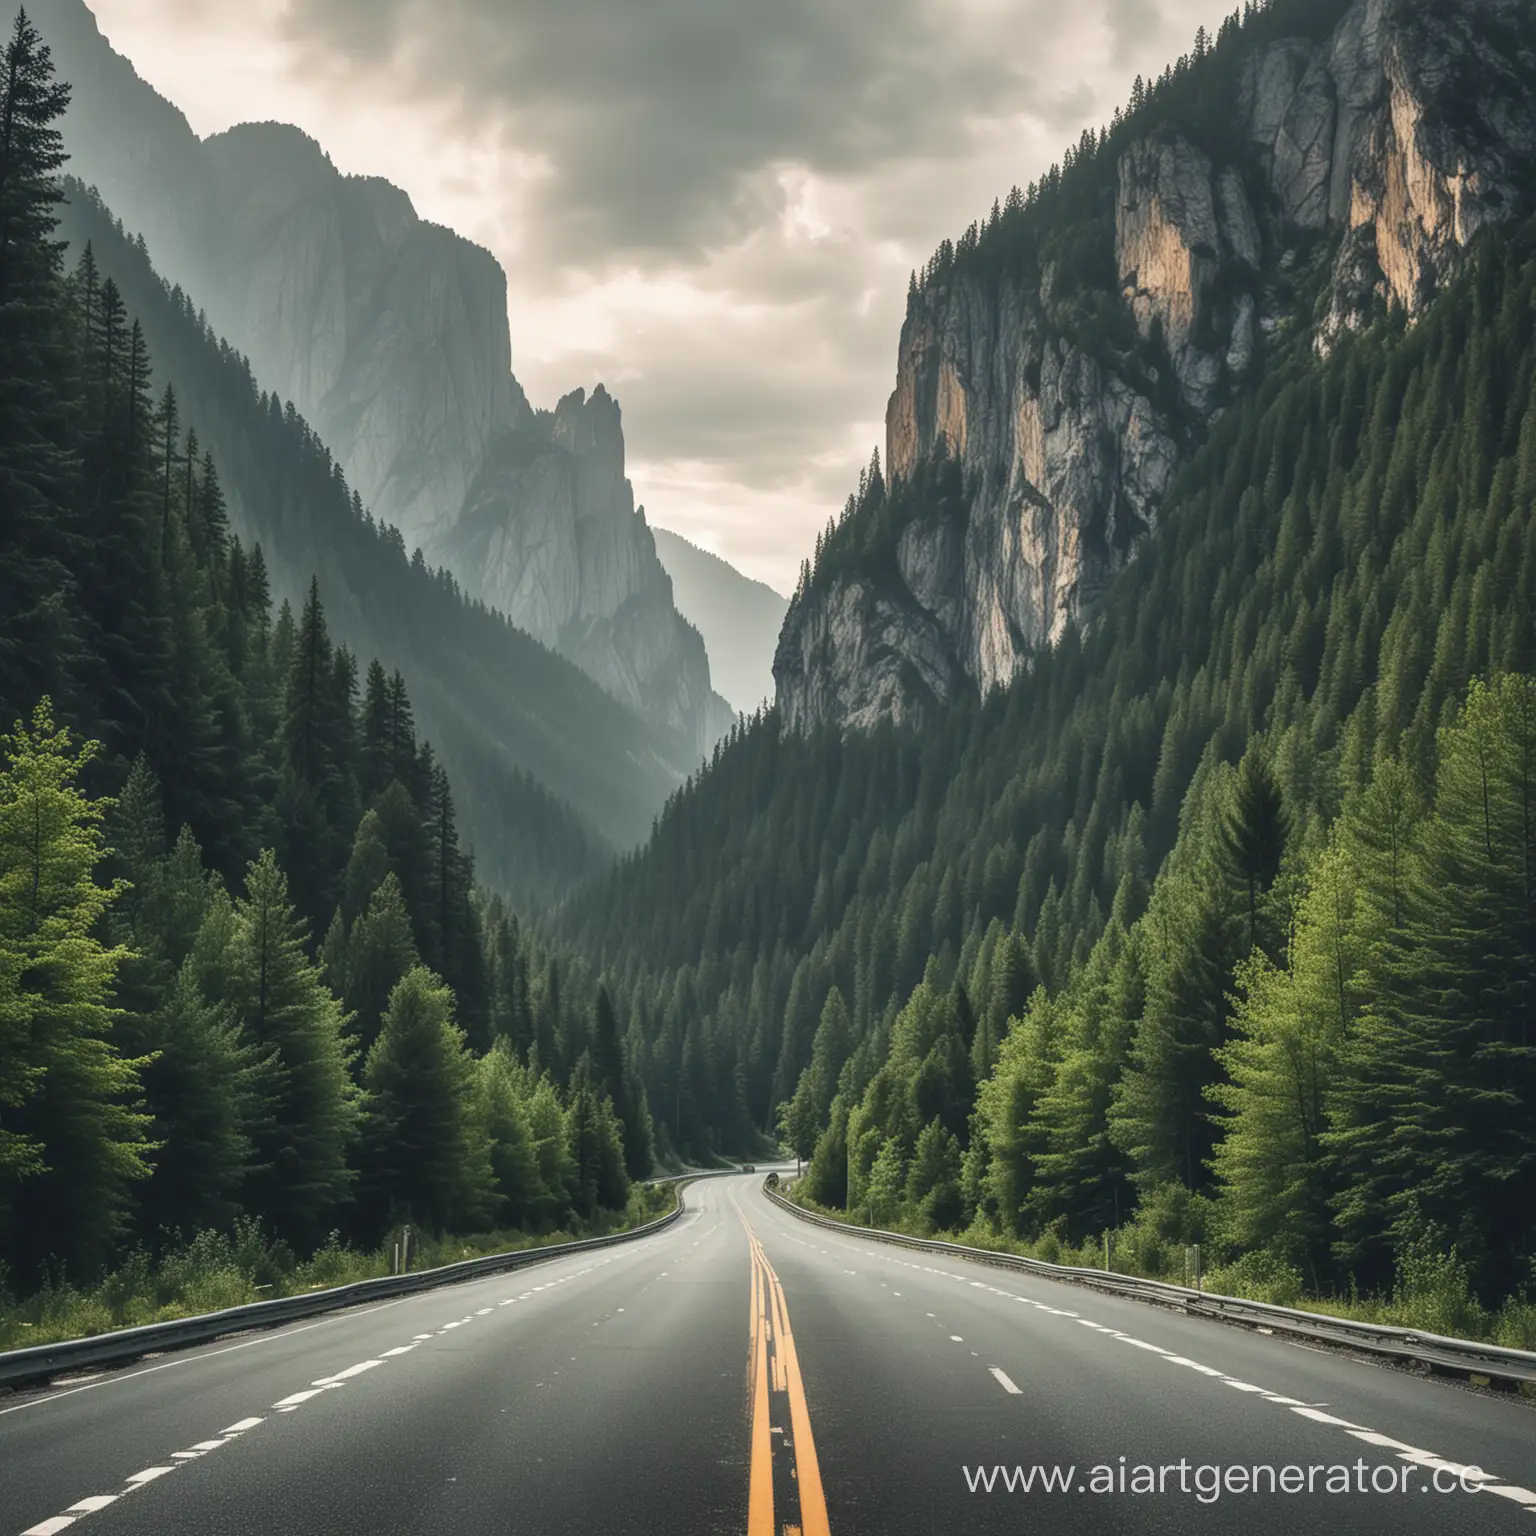 Generate photos of roads and forests mountains